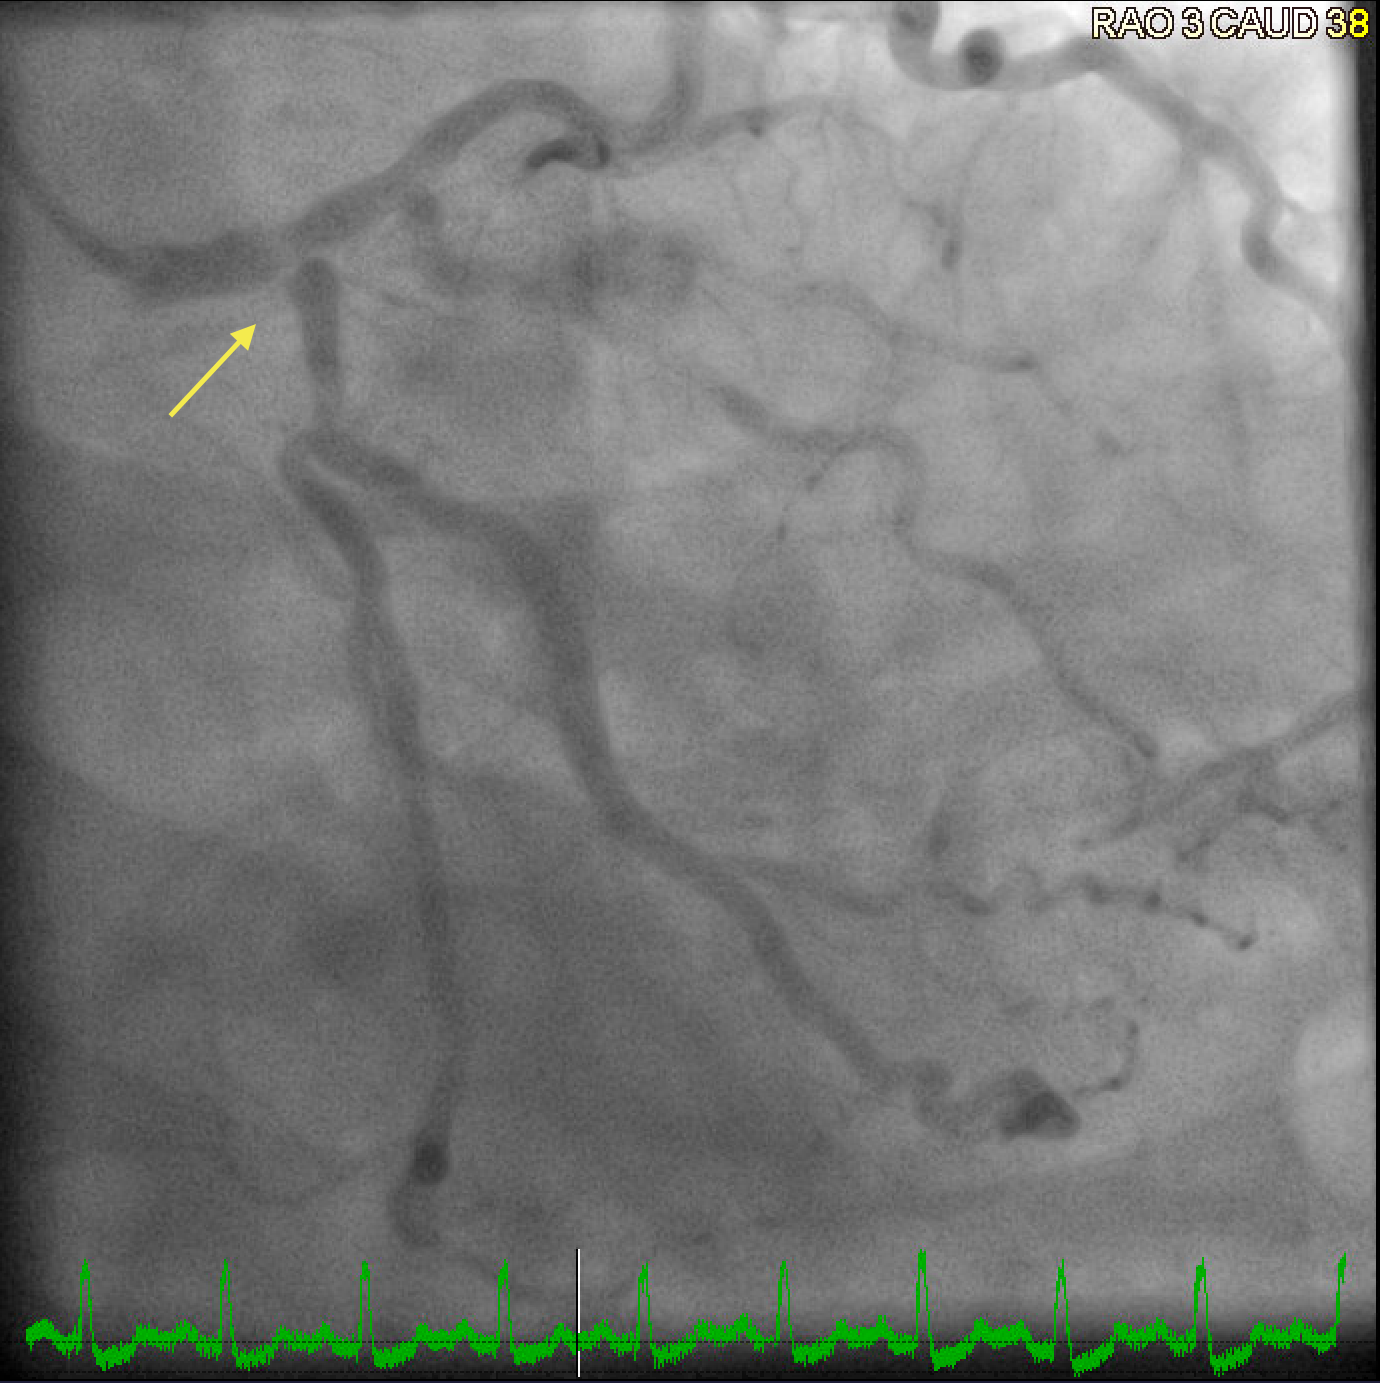 Coronary angiogram showing severe left main coronary artery disease with a bifurcation lesion involving the ostial left anterior descending artery and the ostial left circumflex artery.